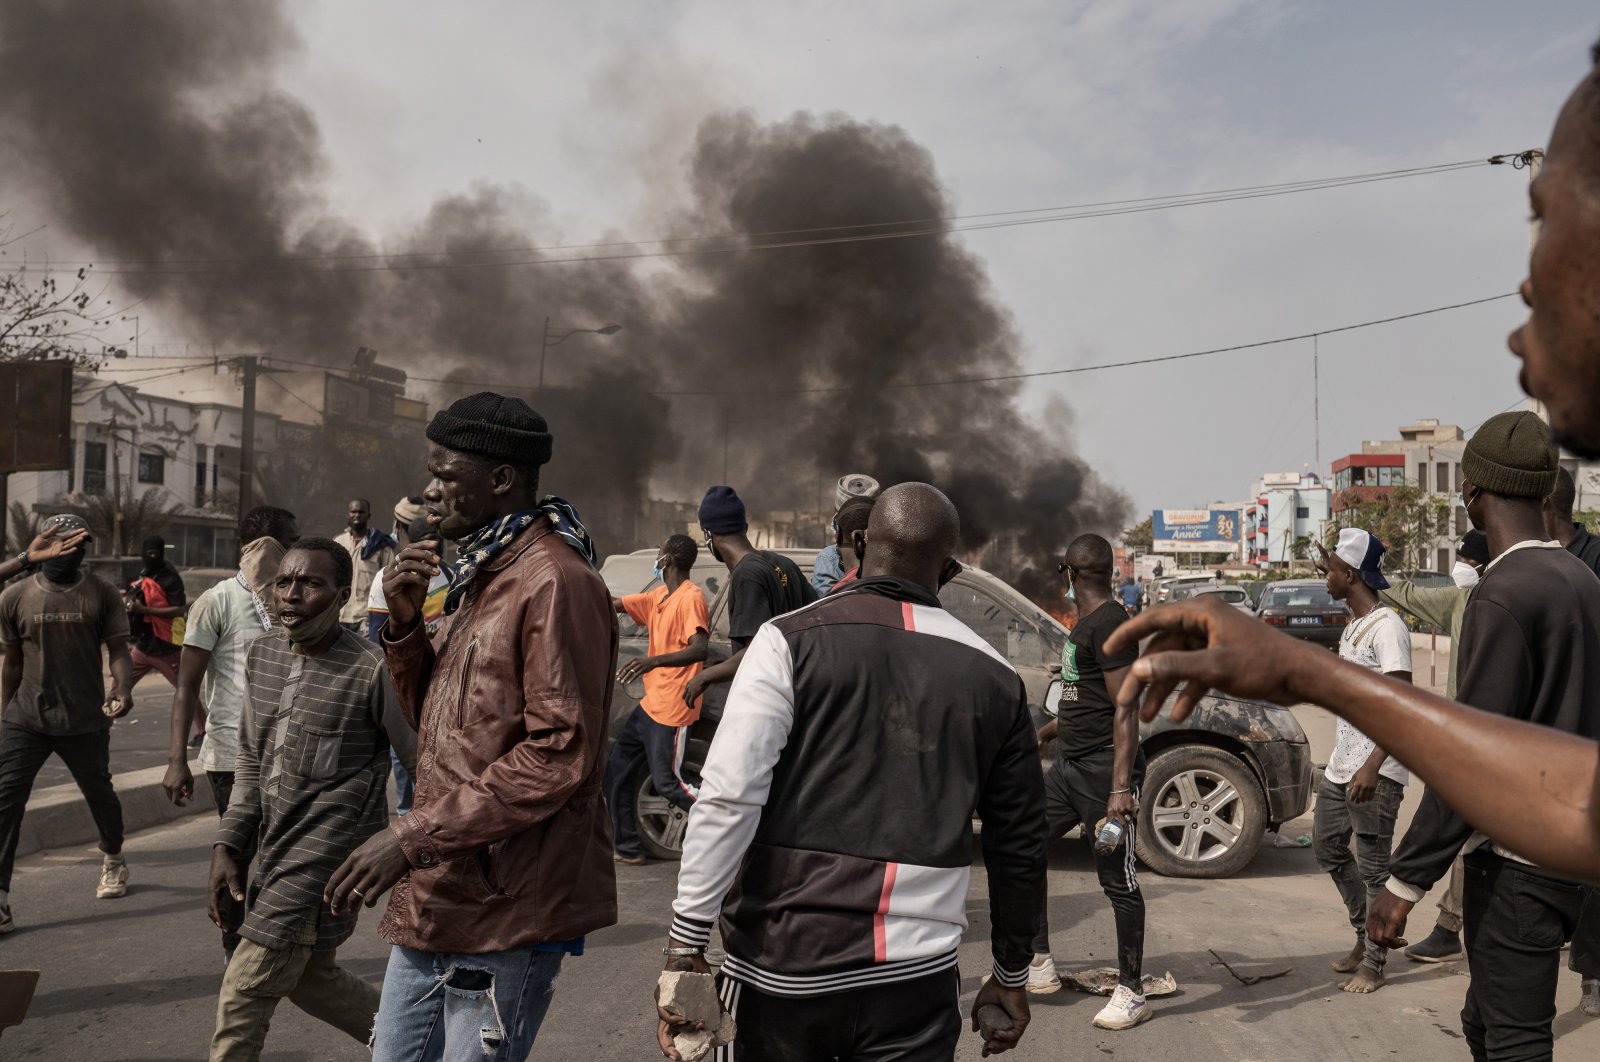 Opposition party supporters showing their support for Ousmane Sonko by blocking roads with burning tires, Dakar, Senegal, March 16, 2023. (AA Photo)